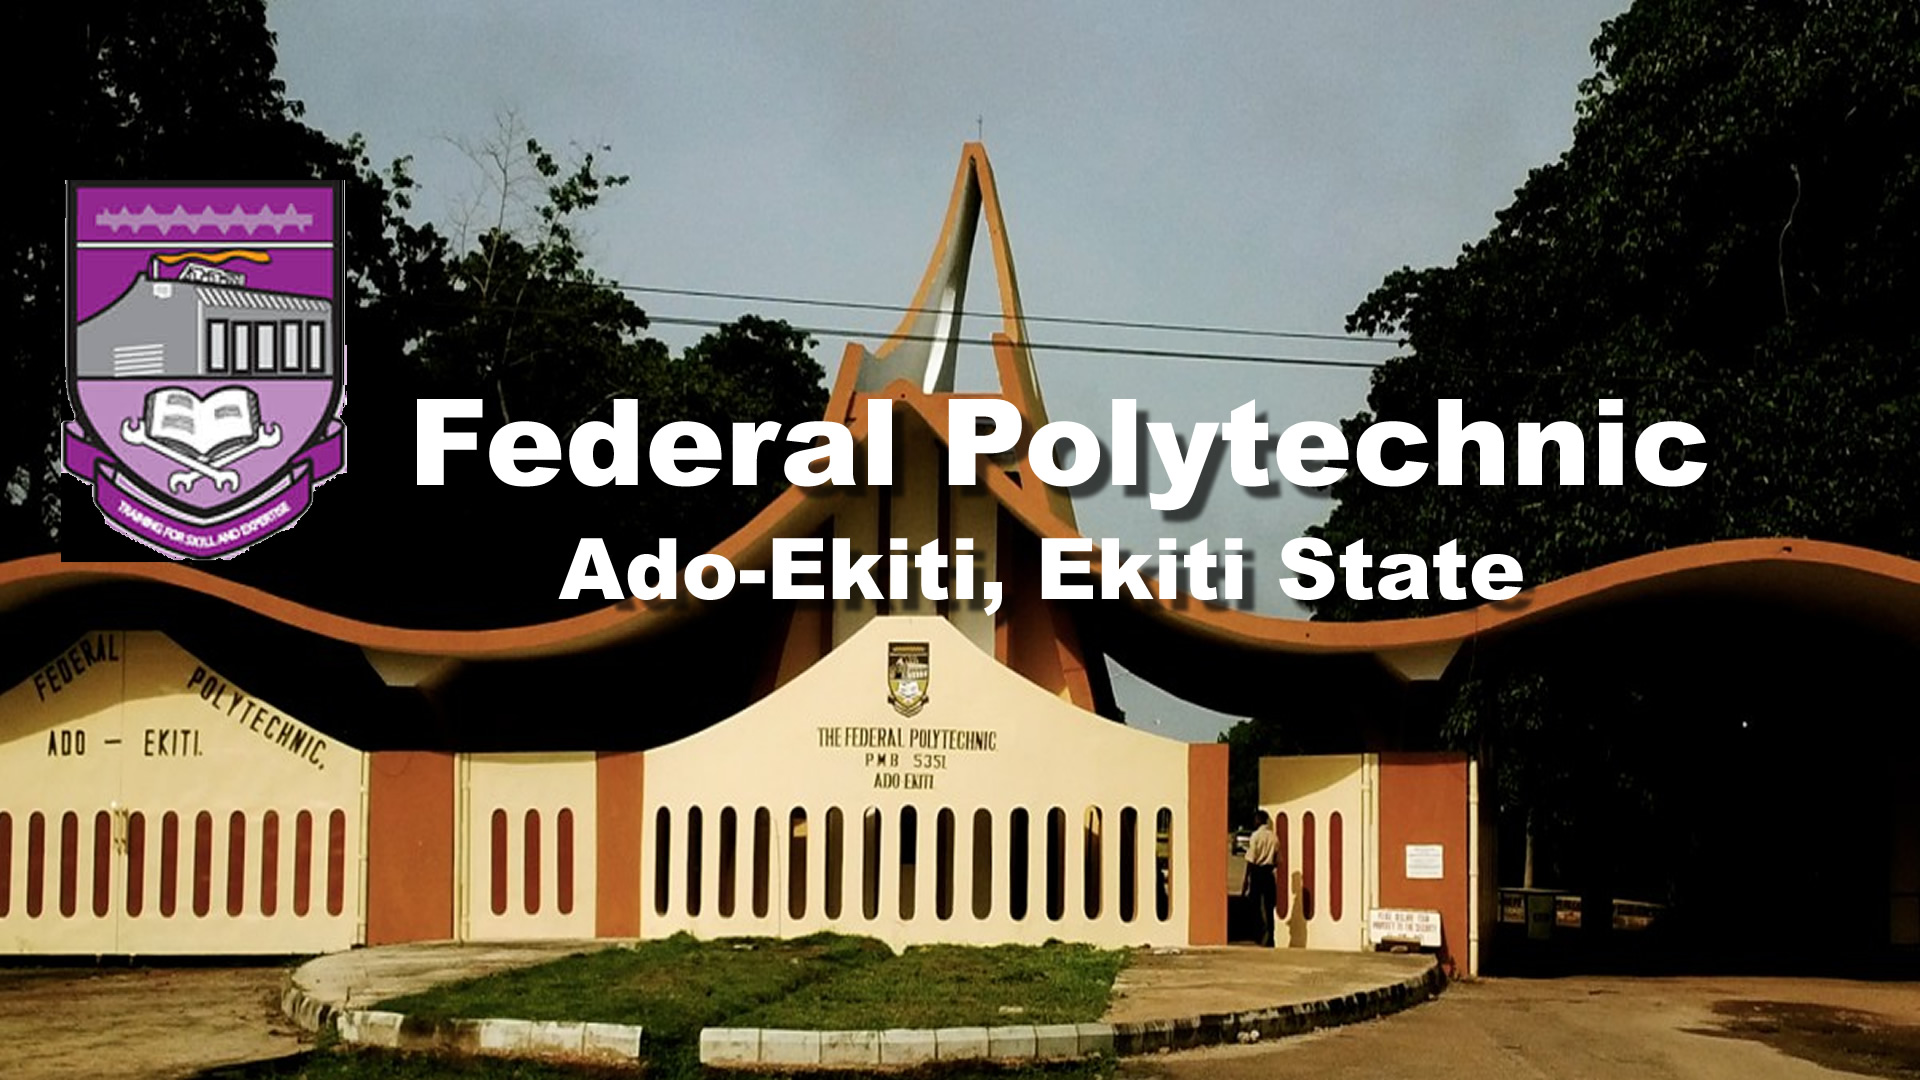 FRSC to Synergize with Federal Polytechnic